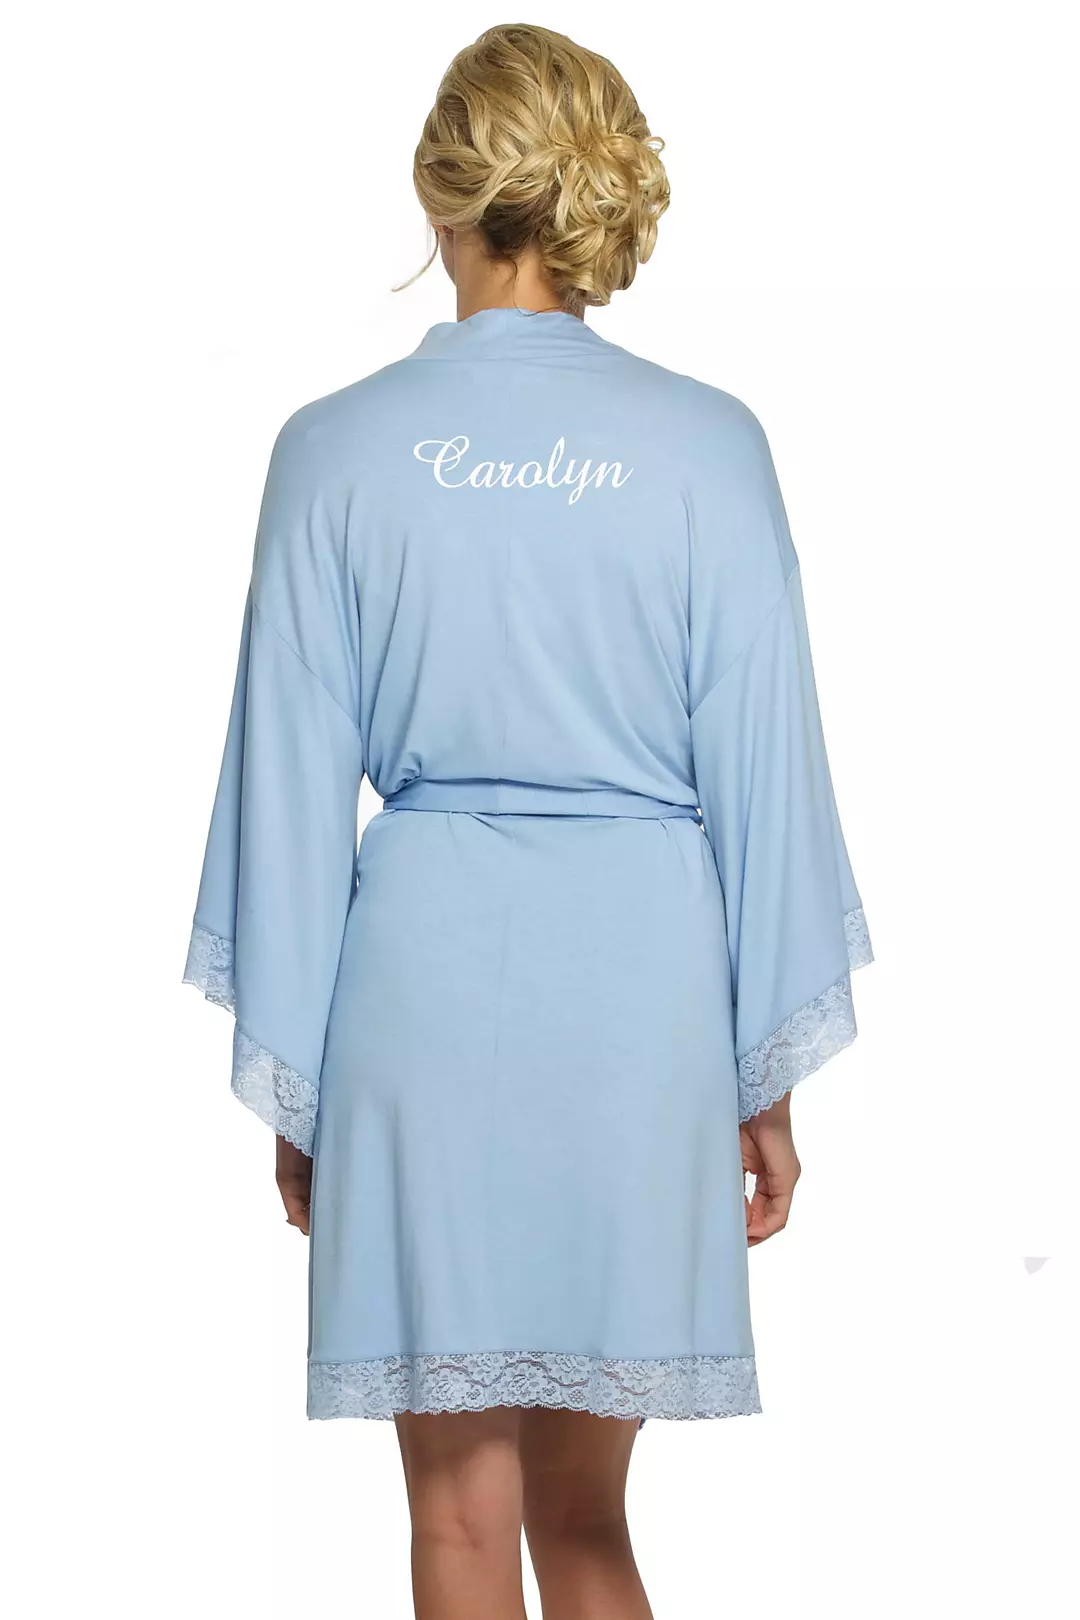 Personalized Jersey Robe with Lace Image